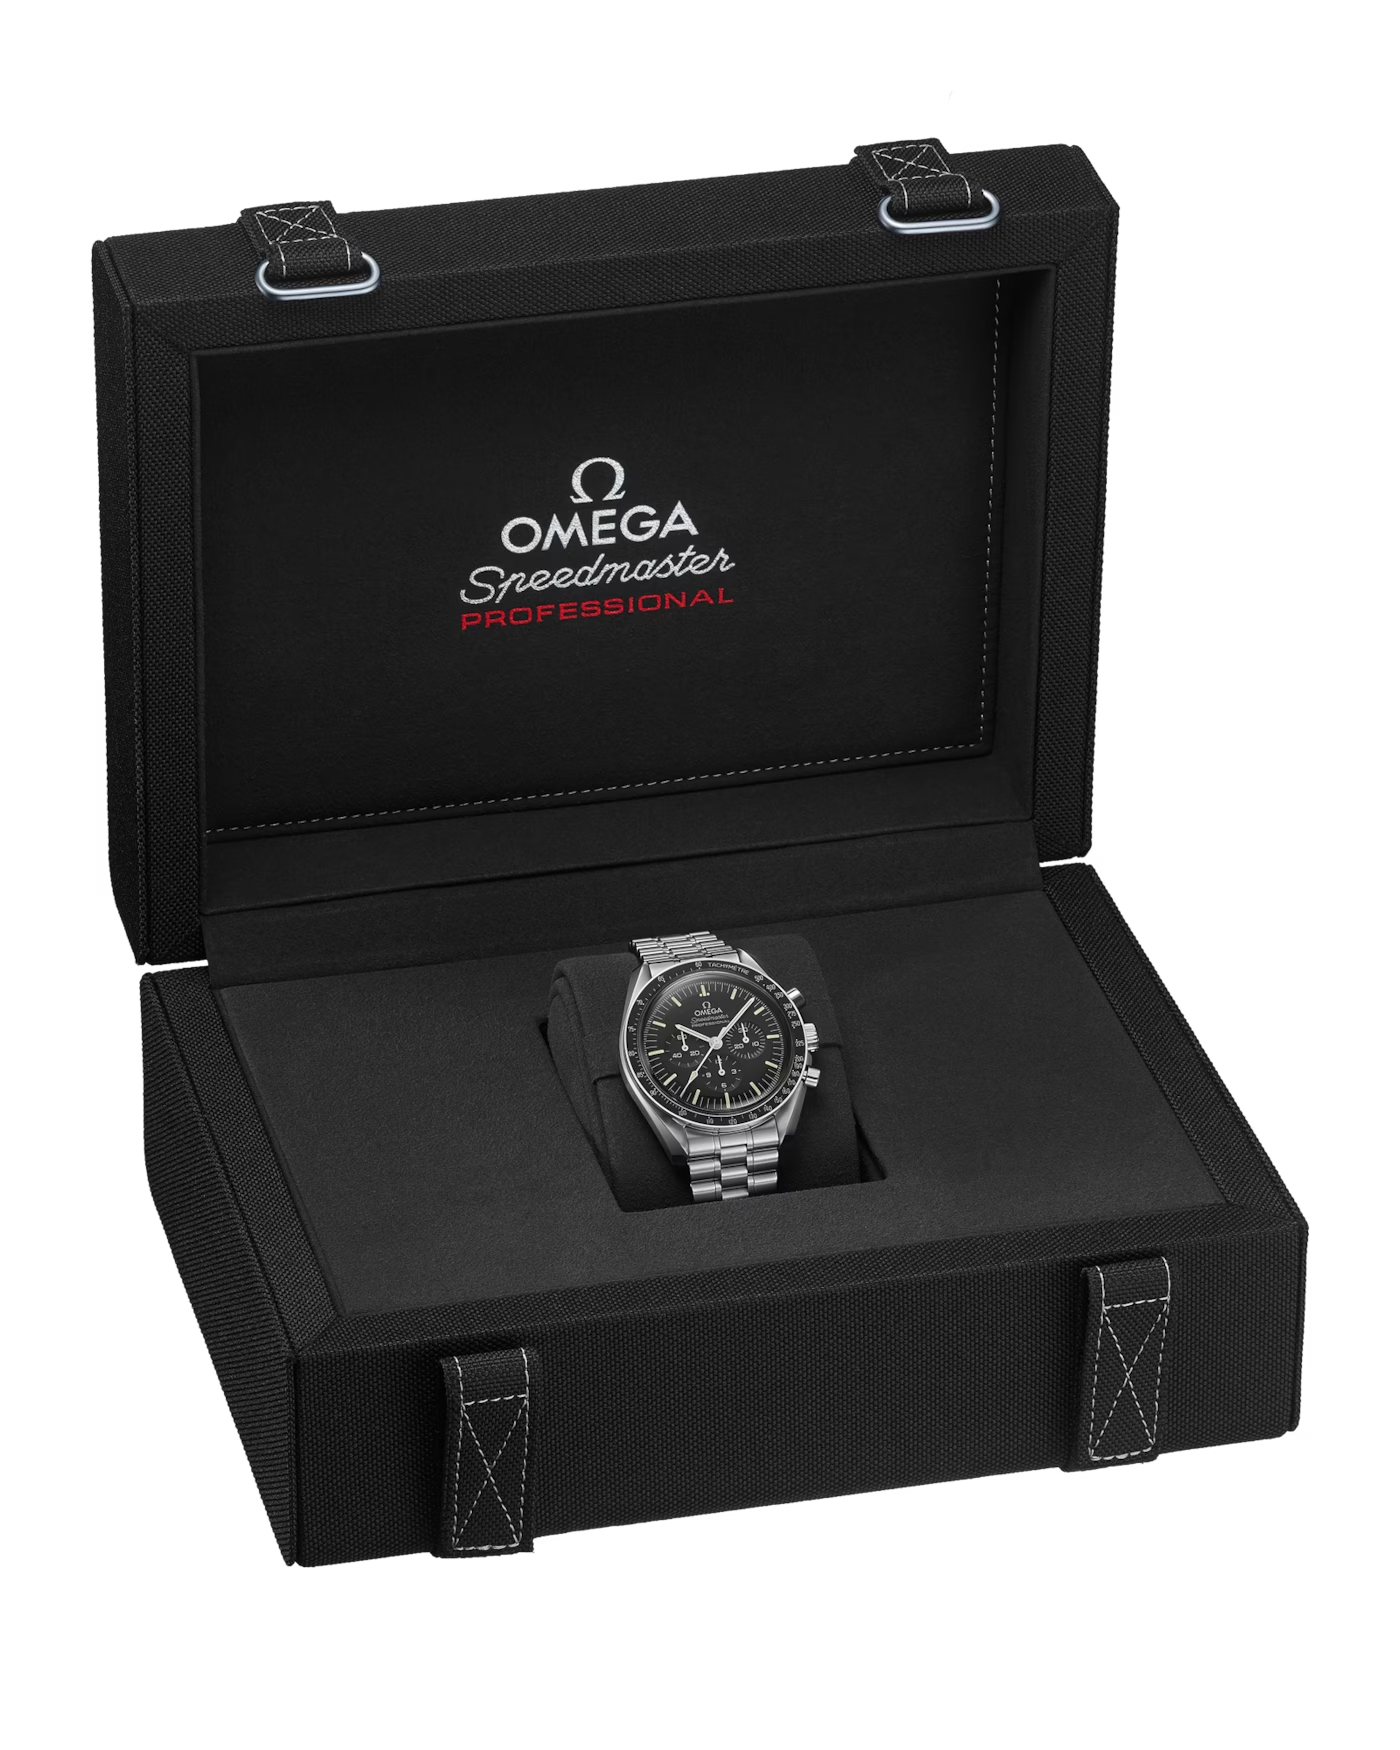 OMEGA-SPEEDMASTER MOONWATCH PROFESSIONAL CO‑AXIAL MASTER CHRONOMETER CHRONOGRAPH 42 MM  310.30.42.50.01.001